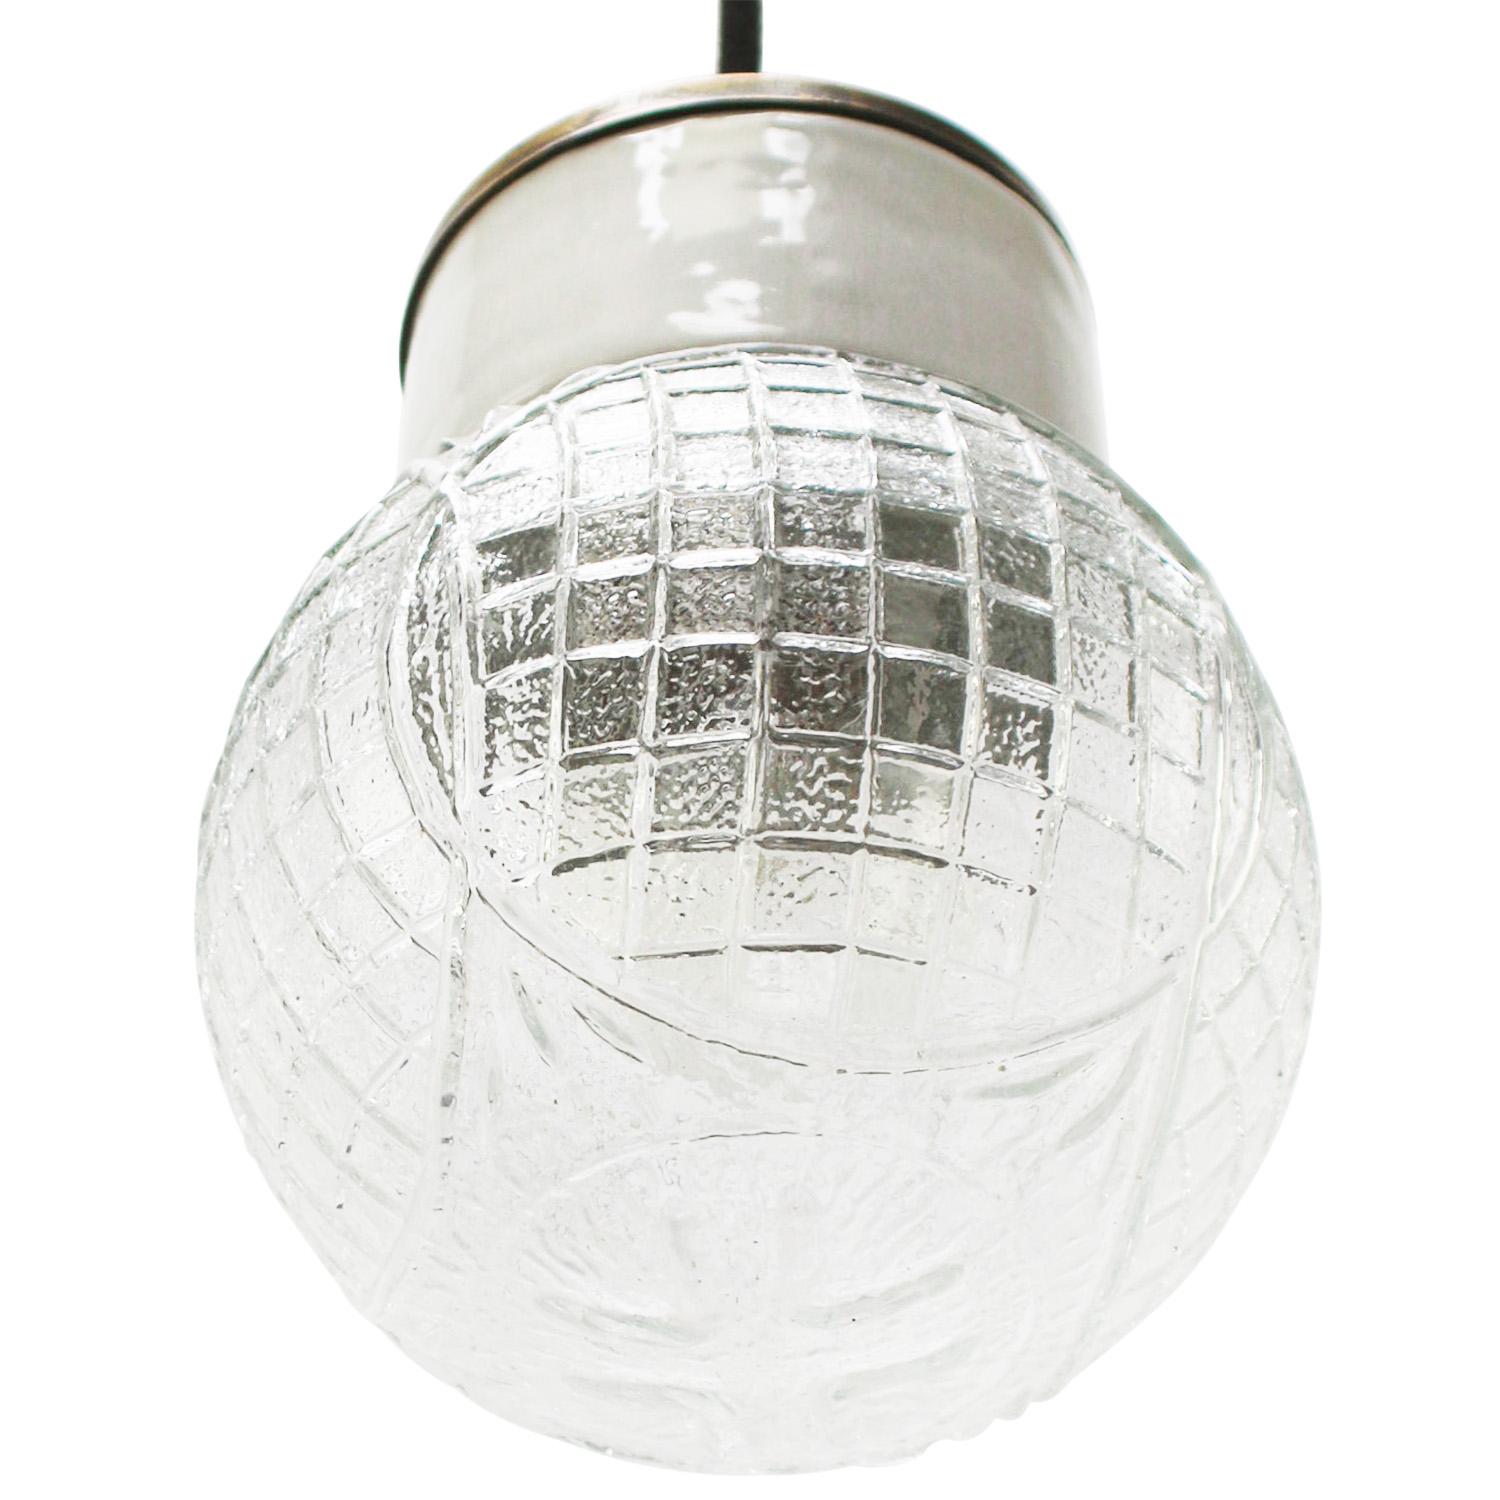 White Porcelain Clear Glass Vintage Industrial Brass Pendant Lights In Good Condition For Sale In Amsterdam, NL